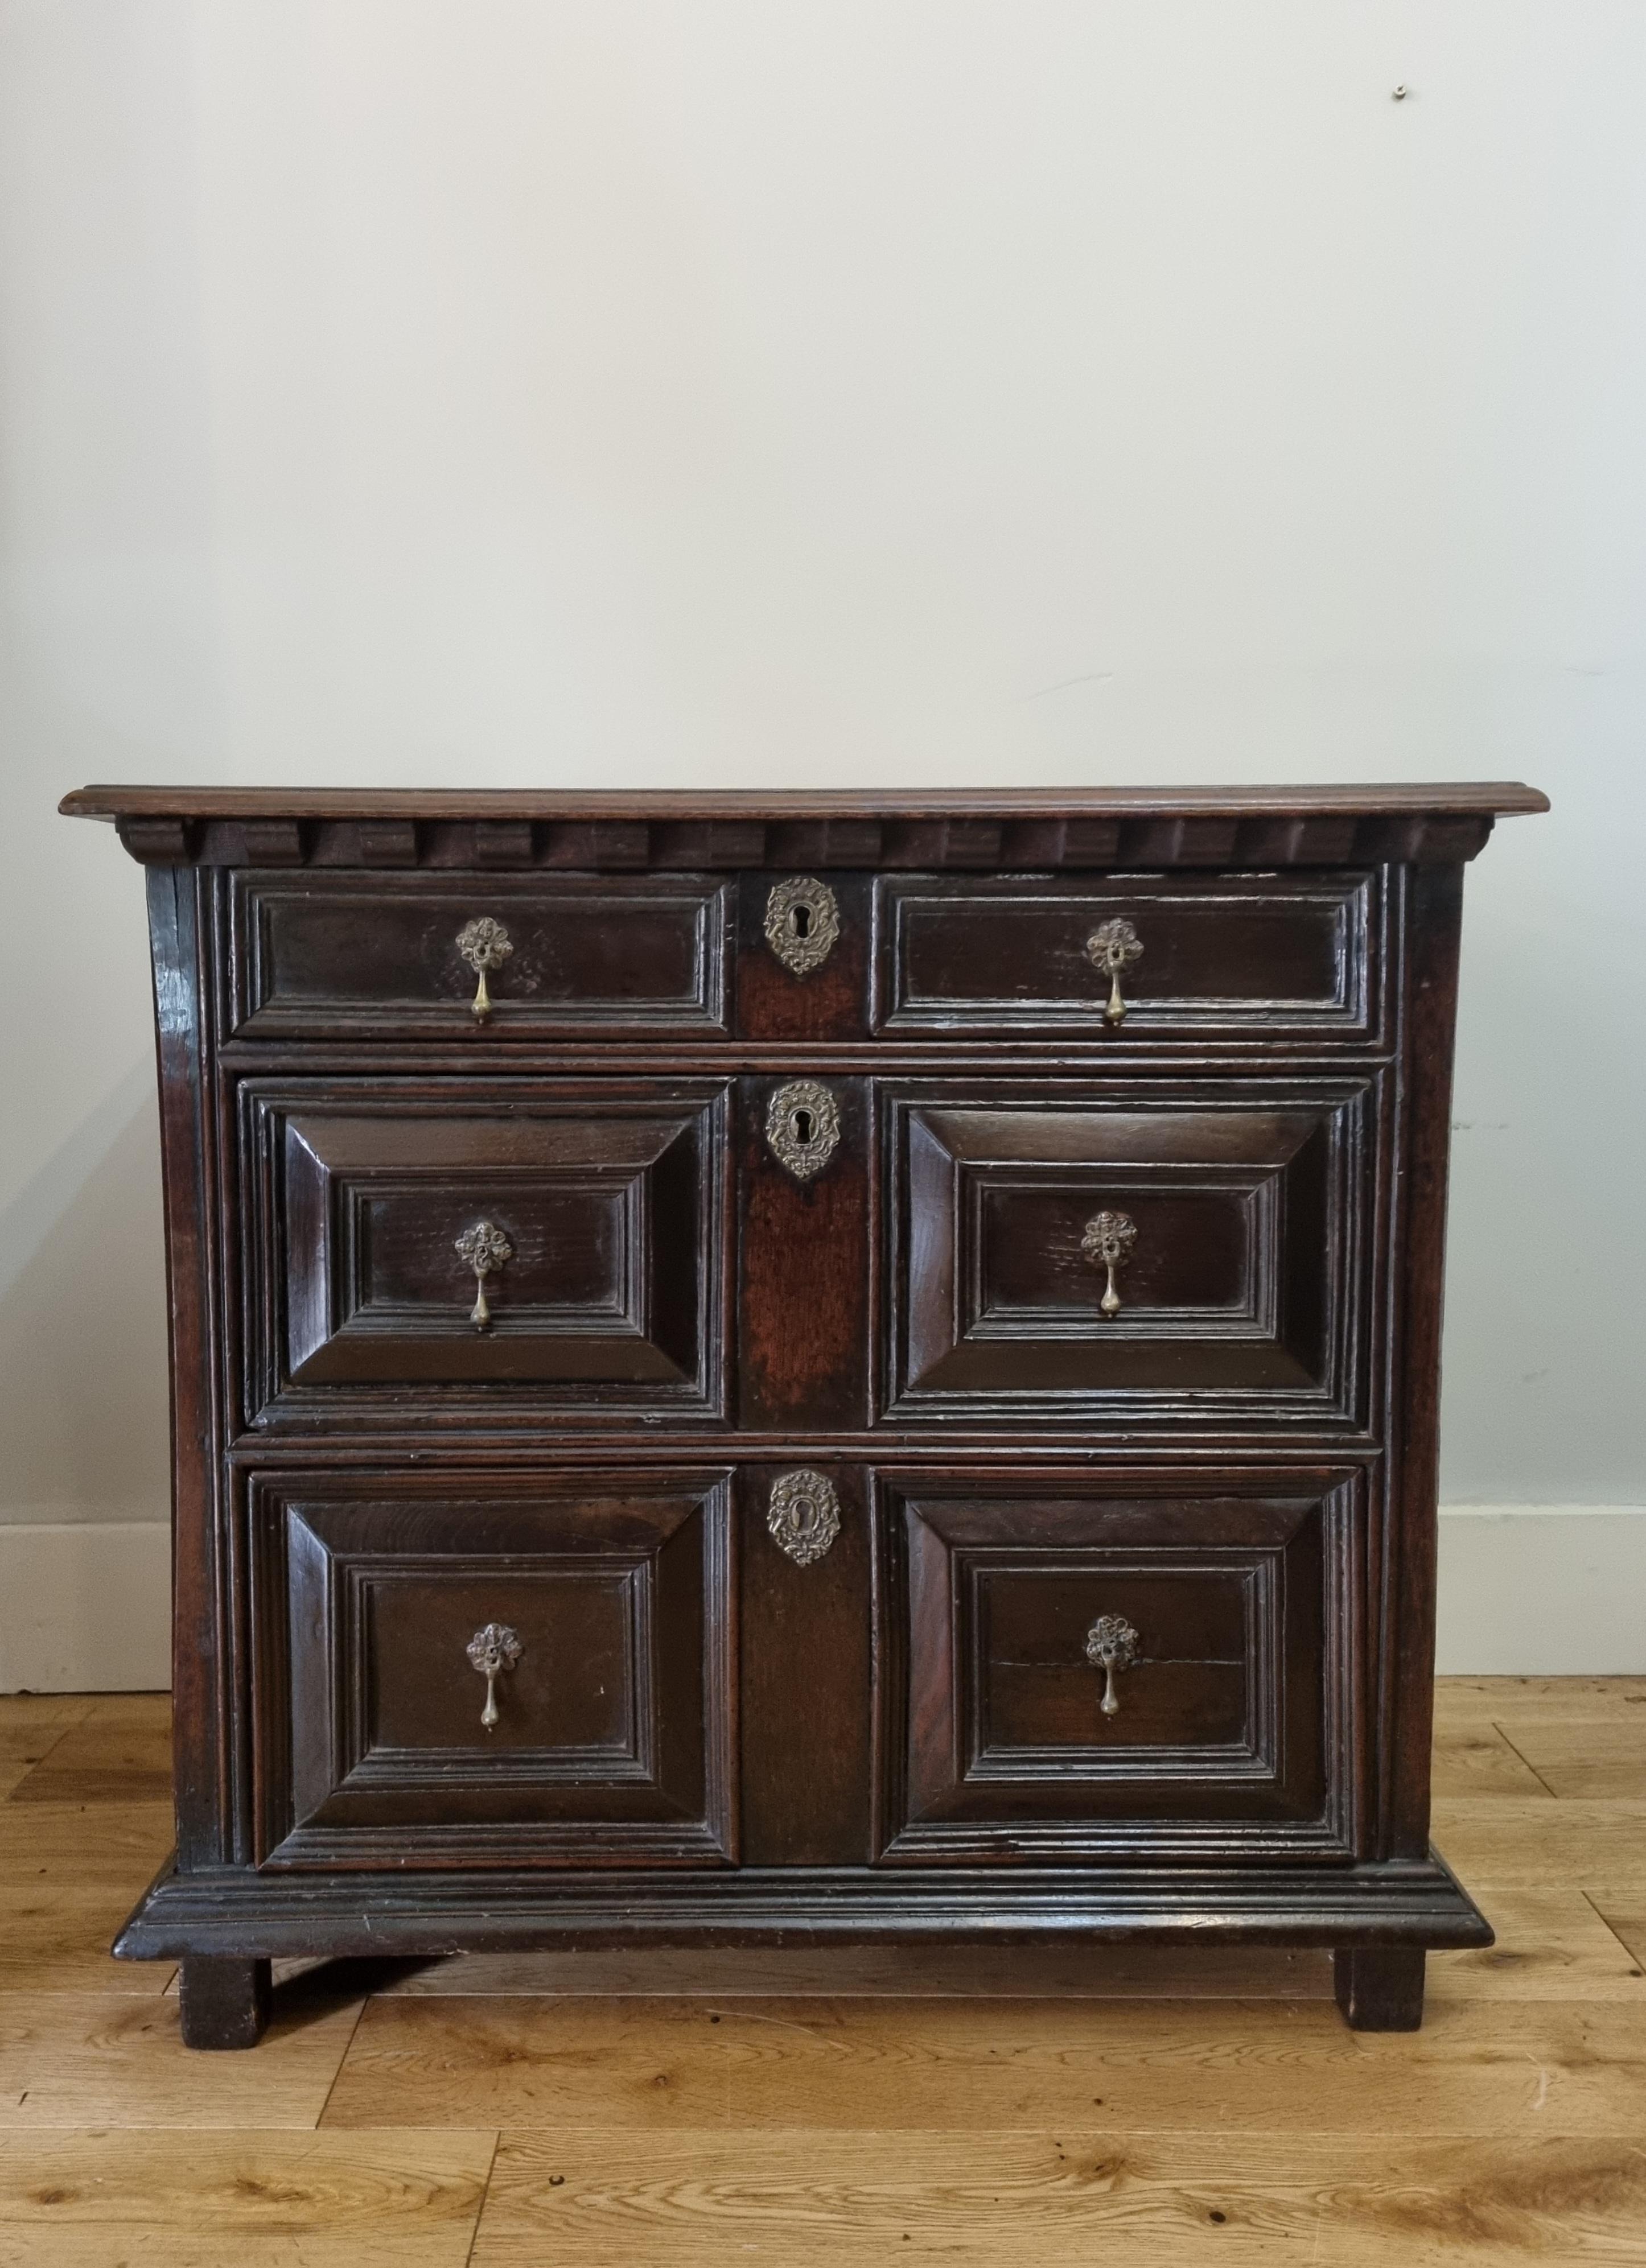 A fine 17th-century Charles II nicely proportioned oak chest of drawers. It features a rectangular planked top. The chest has 2 short and two long drawers, lined with oak, brass drop handles, and escutcheons. It stands on its original stile feet. 